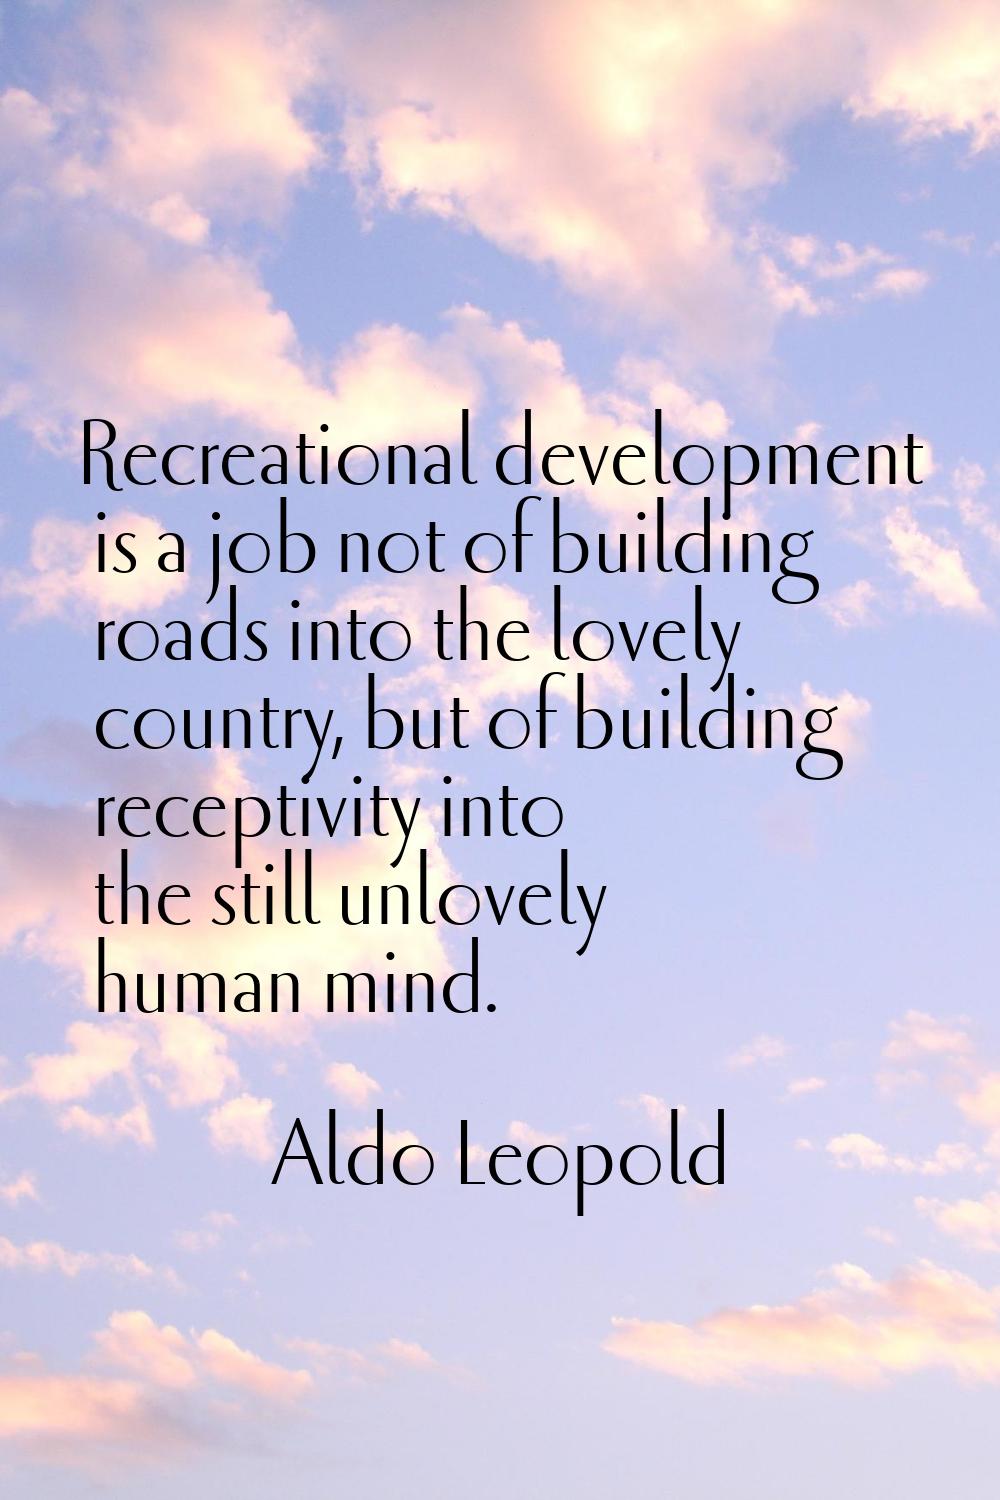 Recreational development is a job not of building roads into the lovely country, but of building re